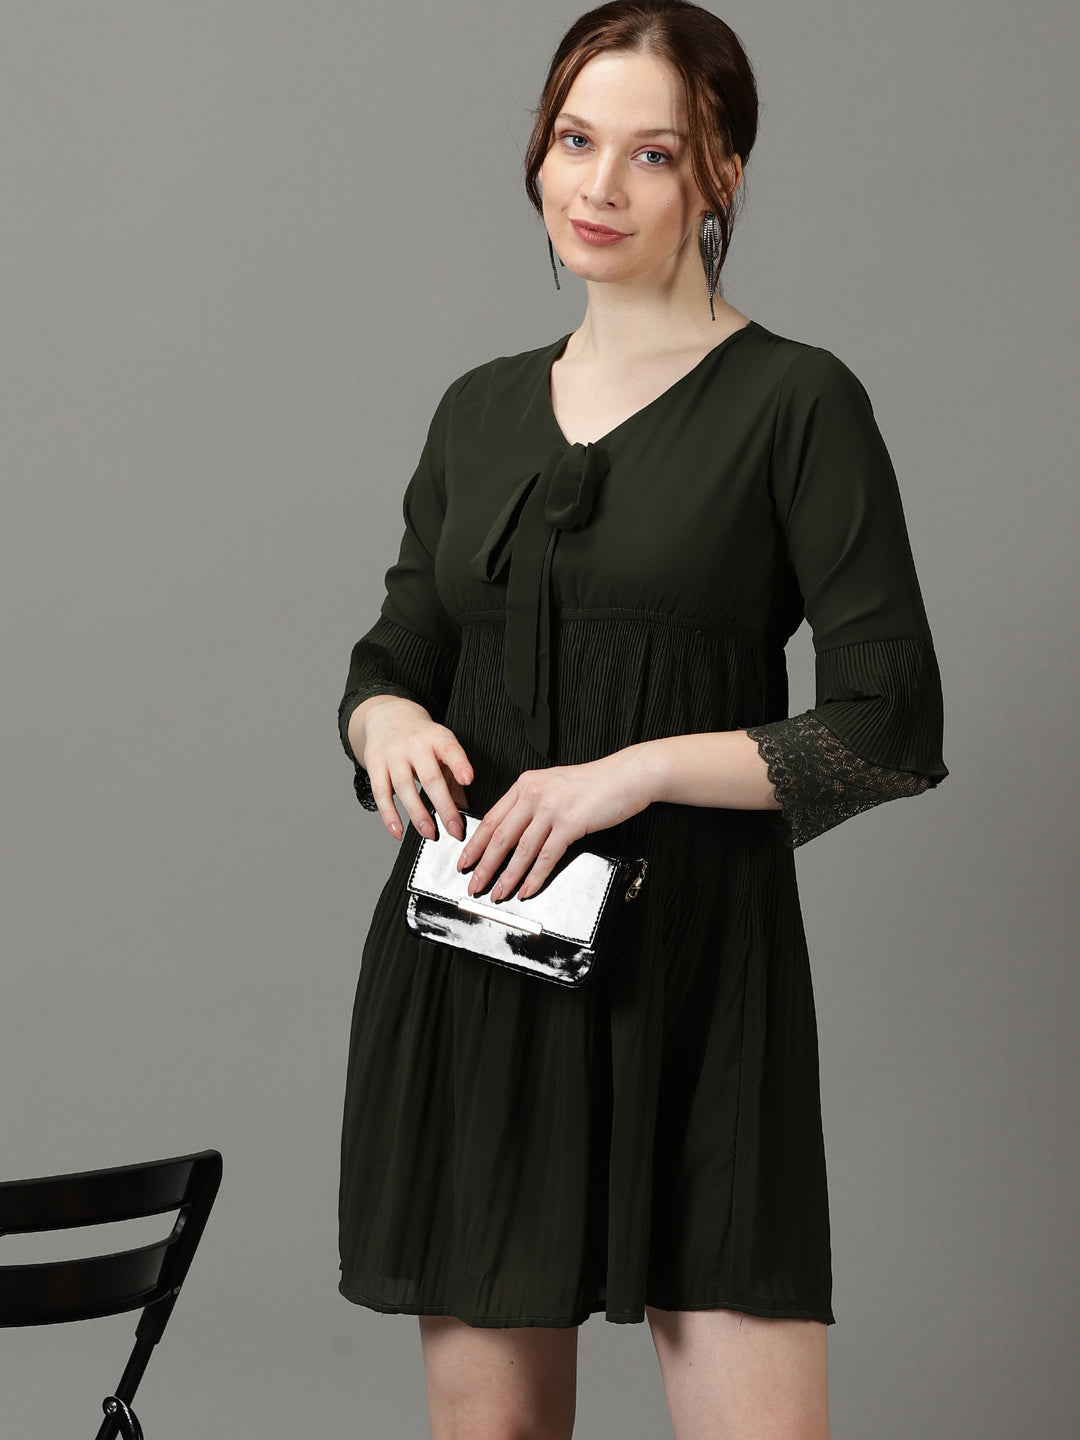 Women's Olive Solid Fit and Flare Dress